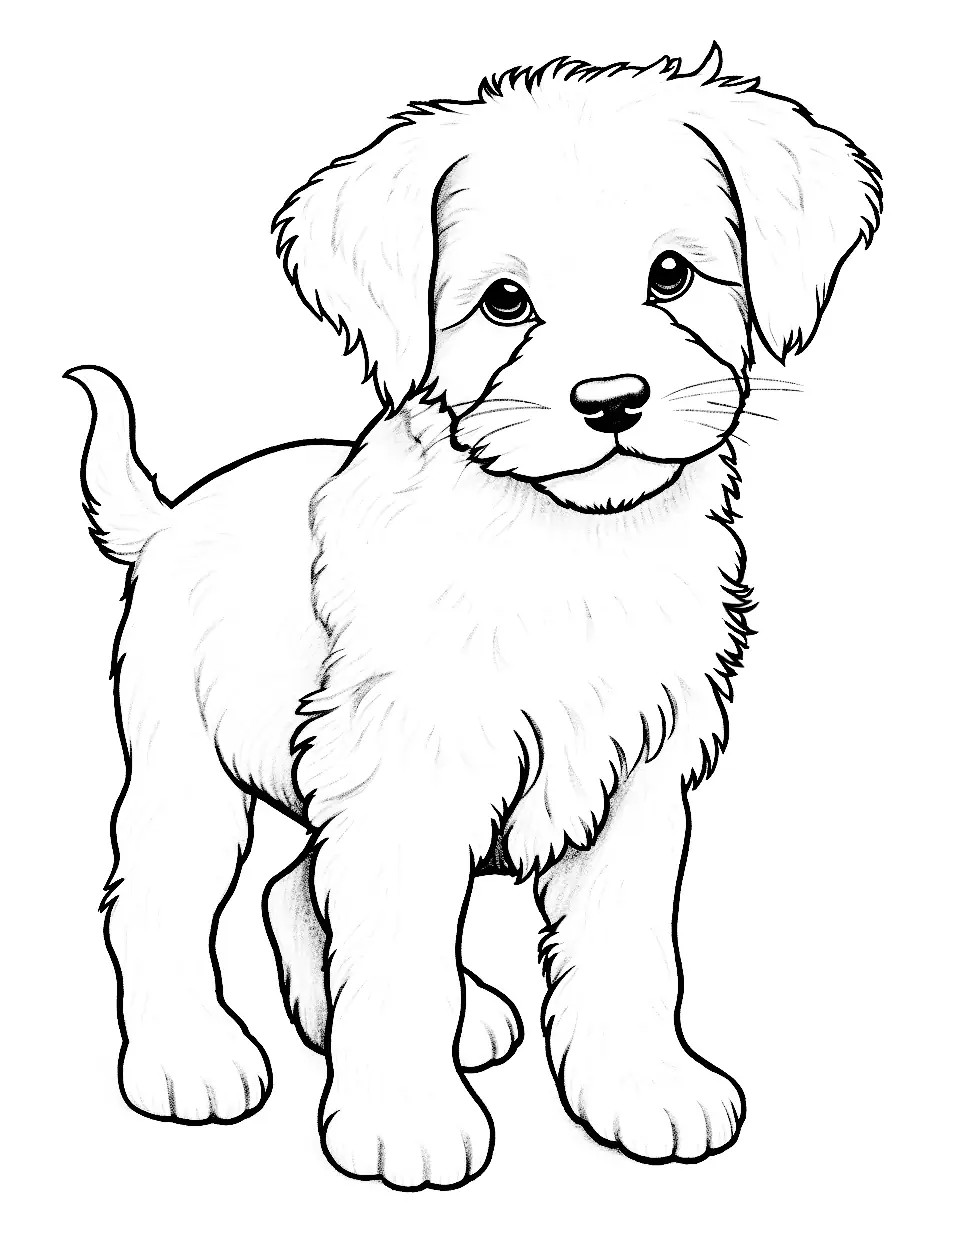 Realistic Rendering Goldendoodle Puppy Coloring Page - A Goldendoodle puppy with curly fur details and a wagging tail.